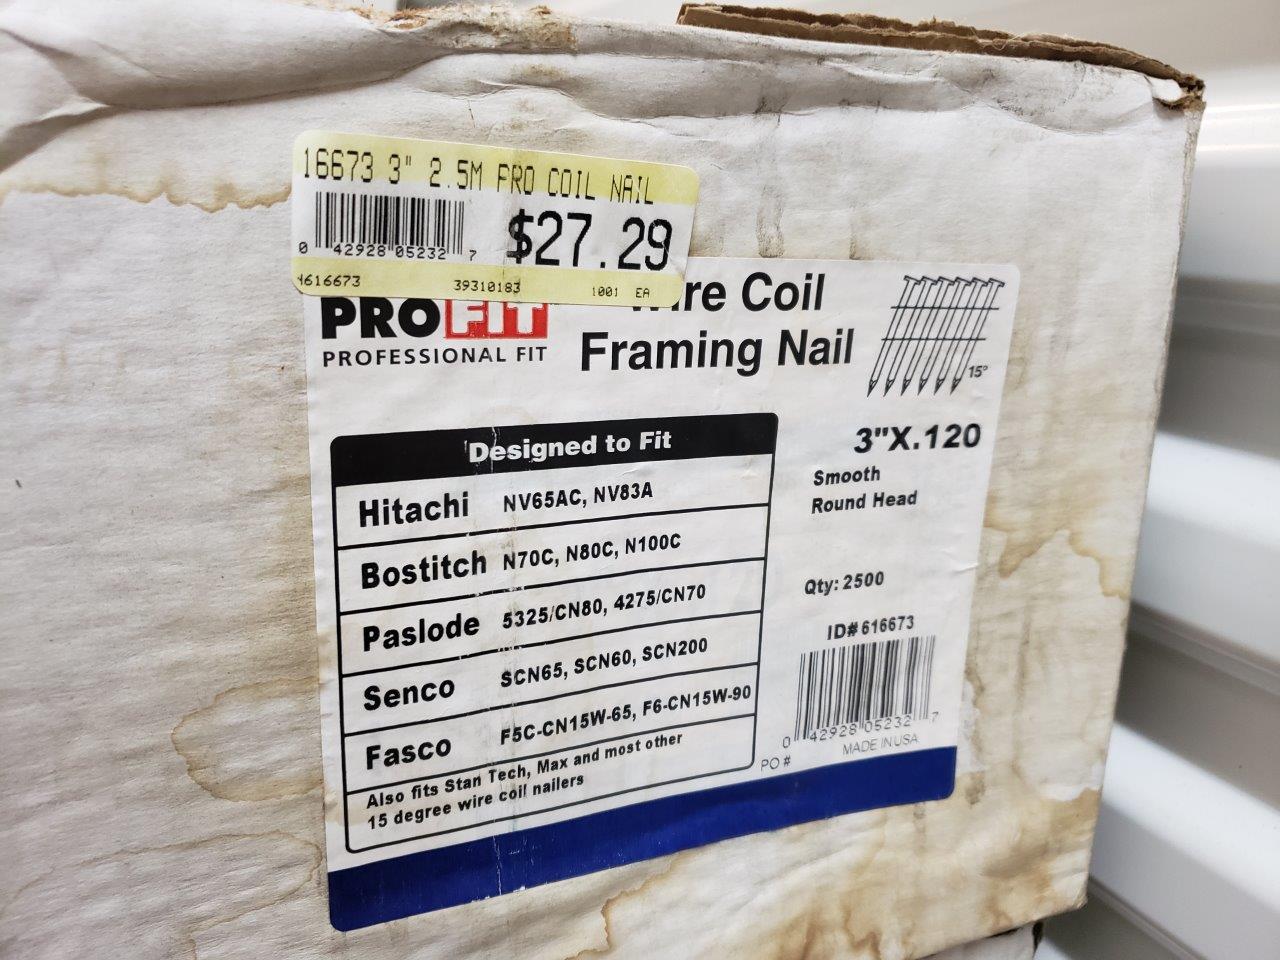 Wire Coil Framing Nails